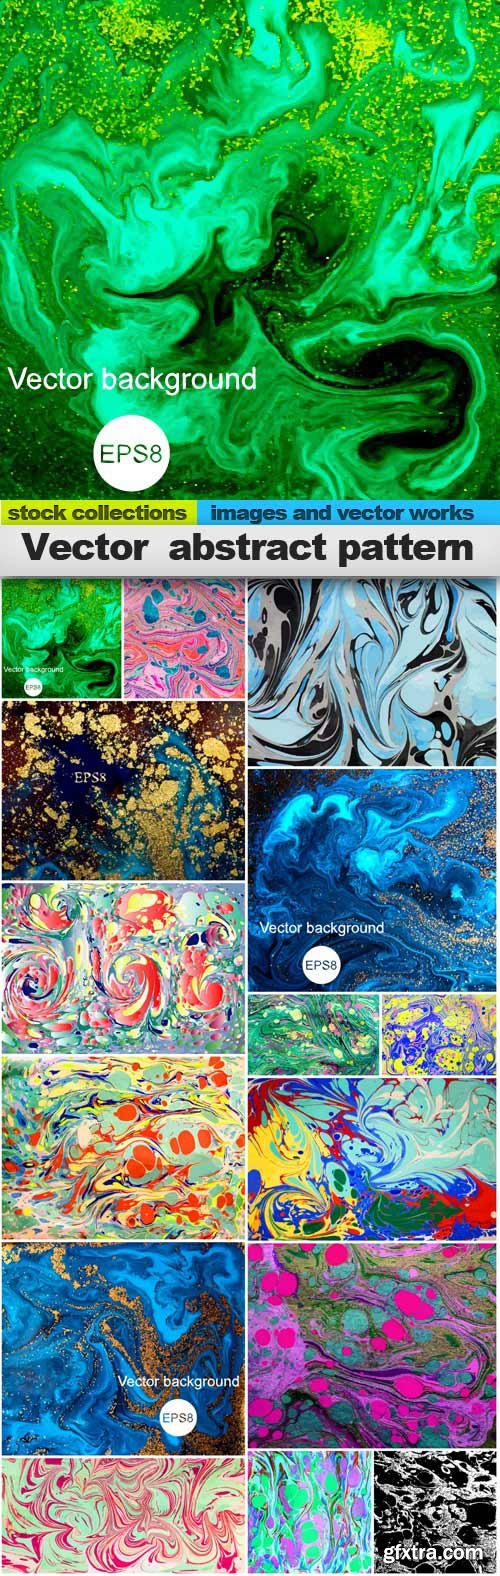 Vector abstract pattern, 15 x EPS